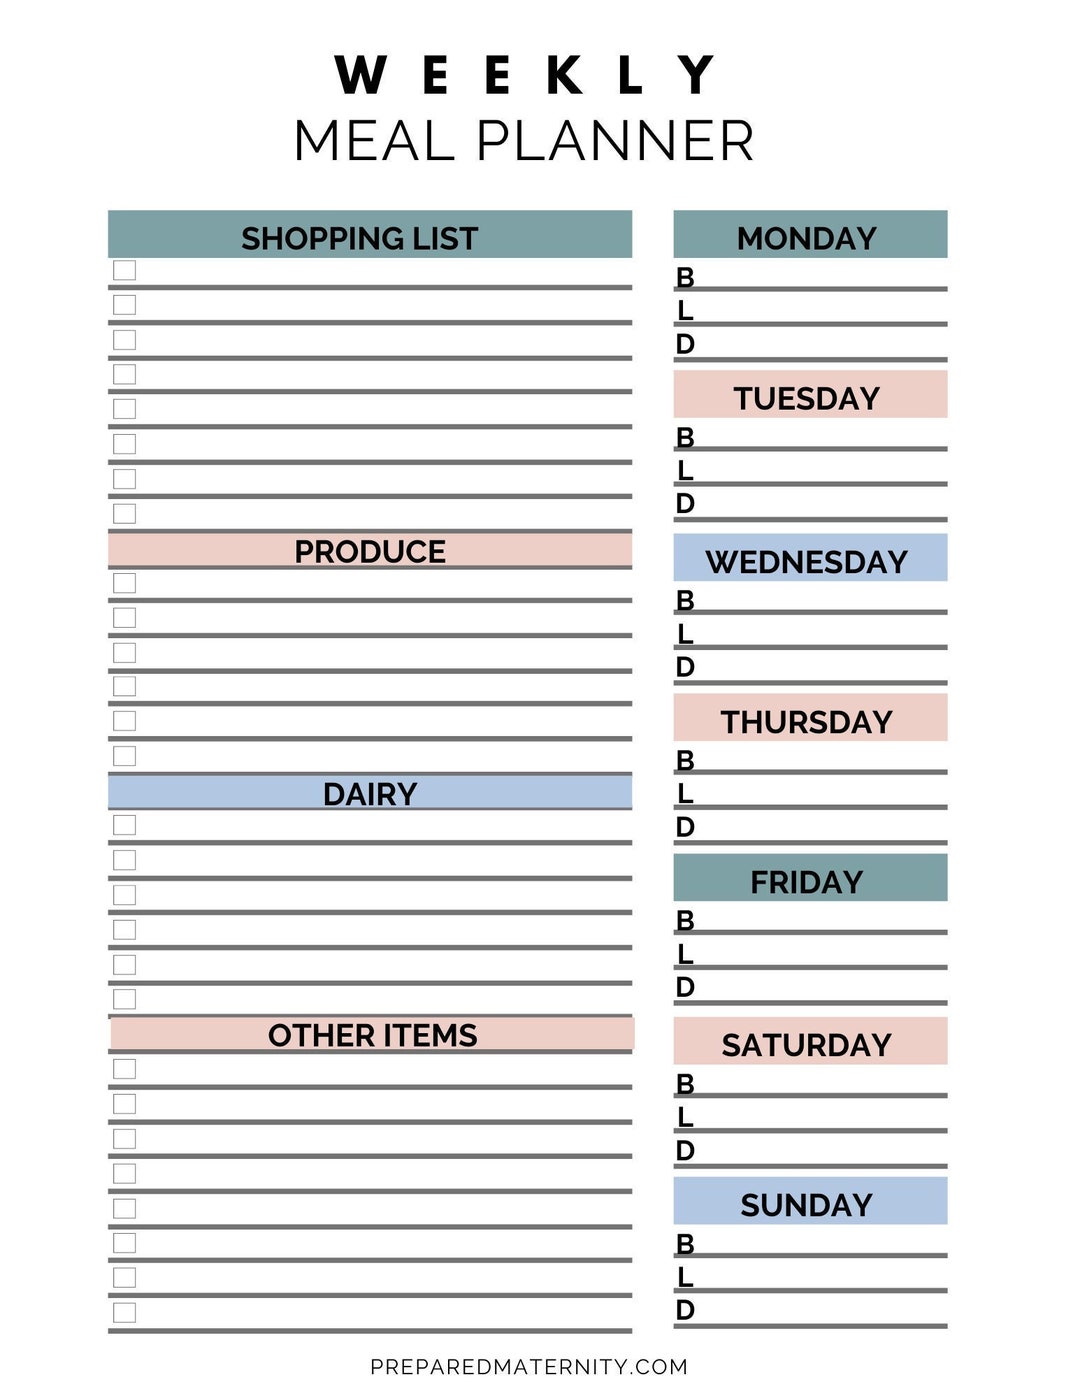 Weekly Meal Planner With Shopping List - Etsy